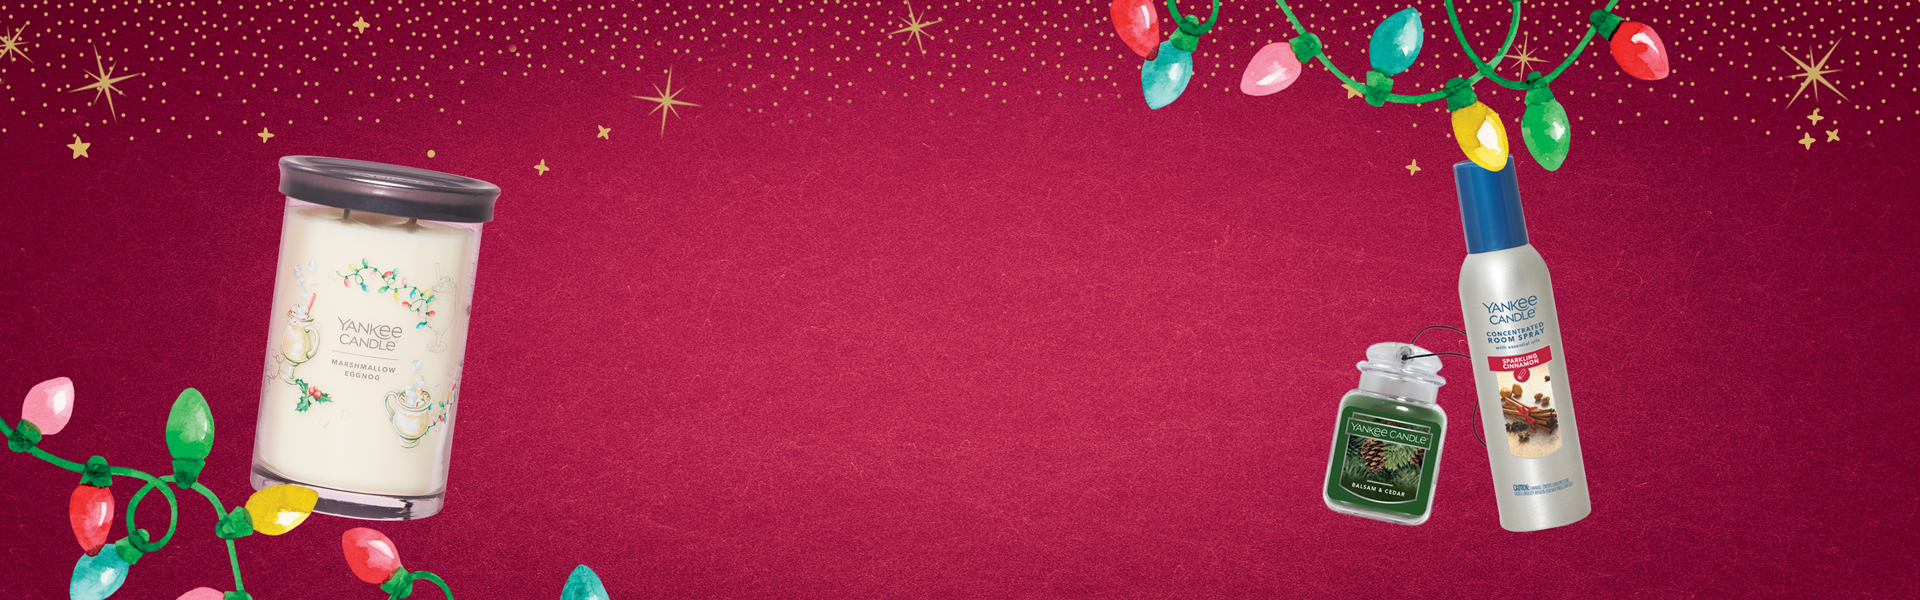 dark pink holiday background with assorted festive yankee candle products